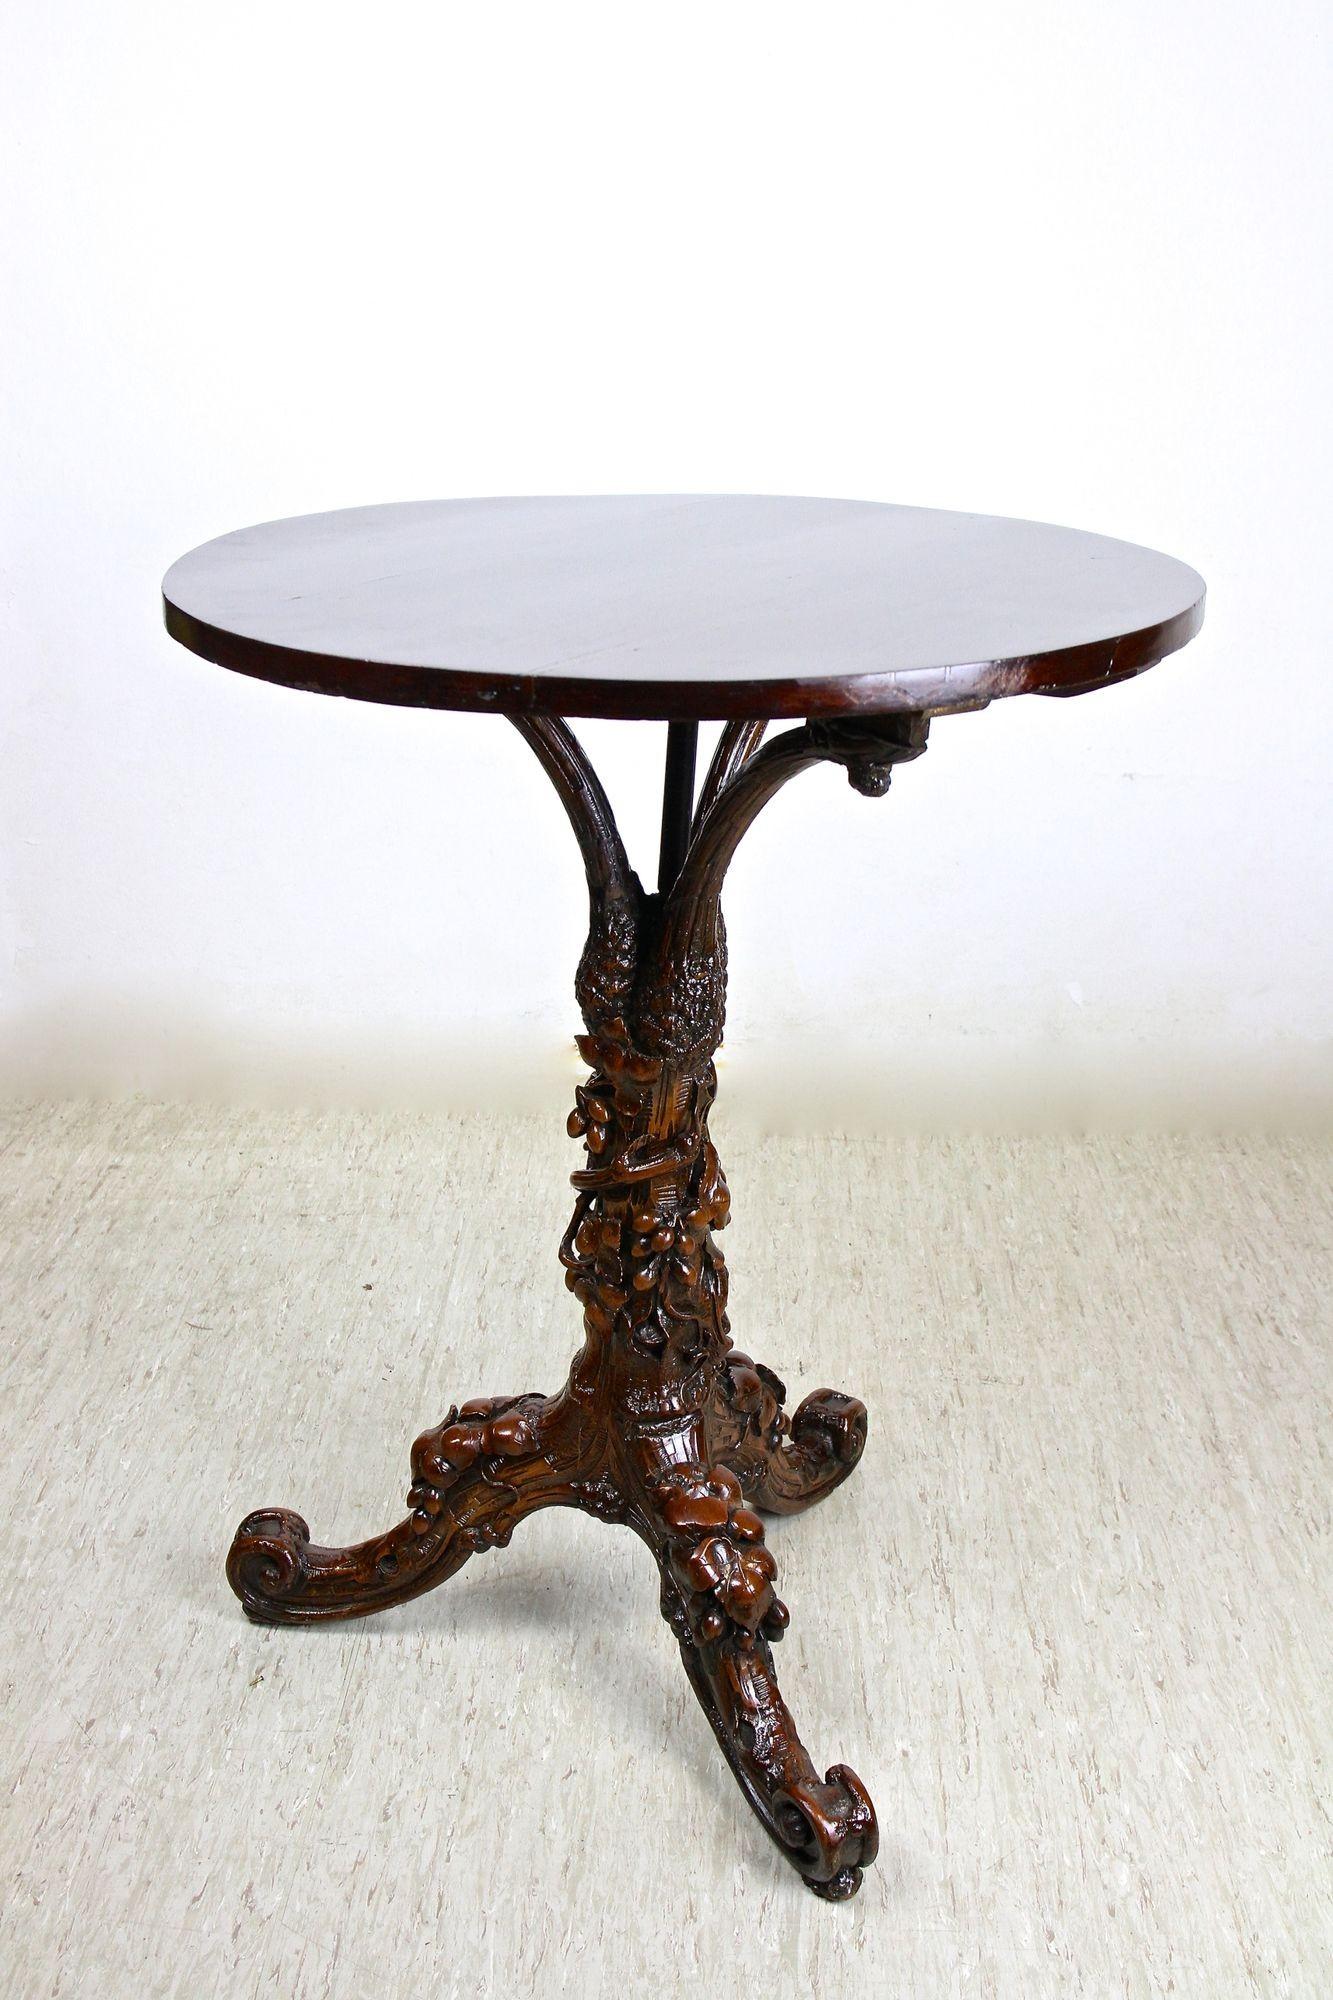 Black Forest Rustic Side Table with Handcarved Vine Theme, Austria, ca. 1880 For Sale 11